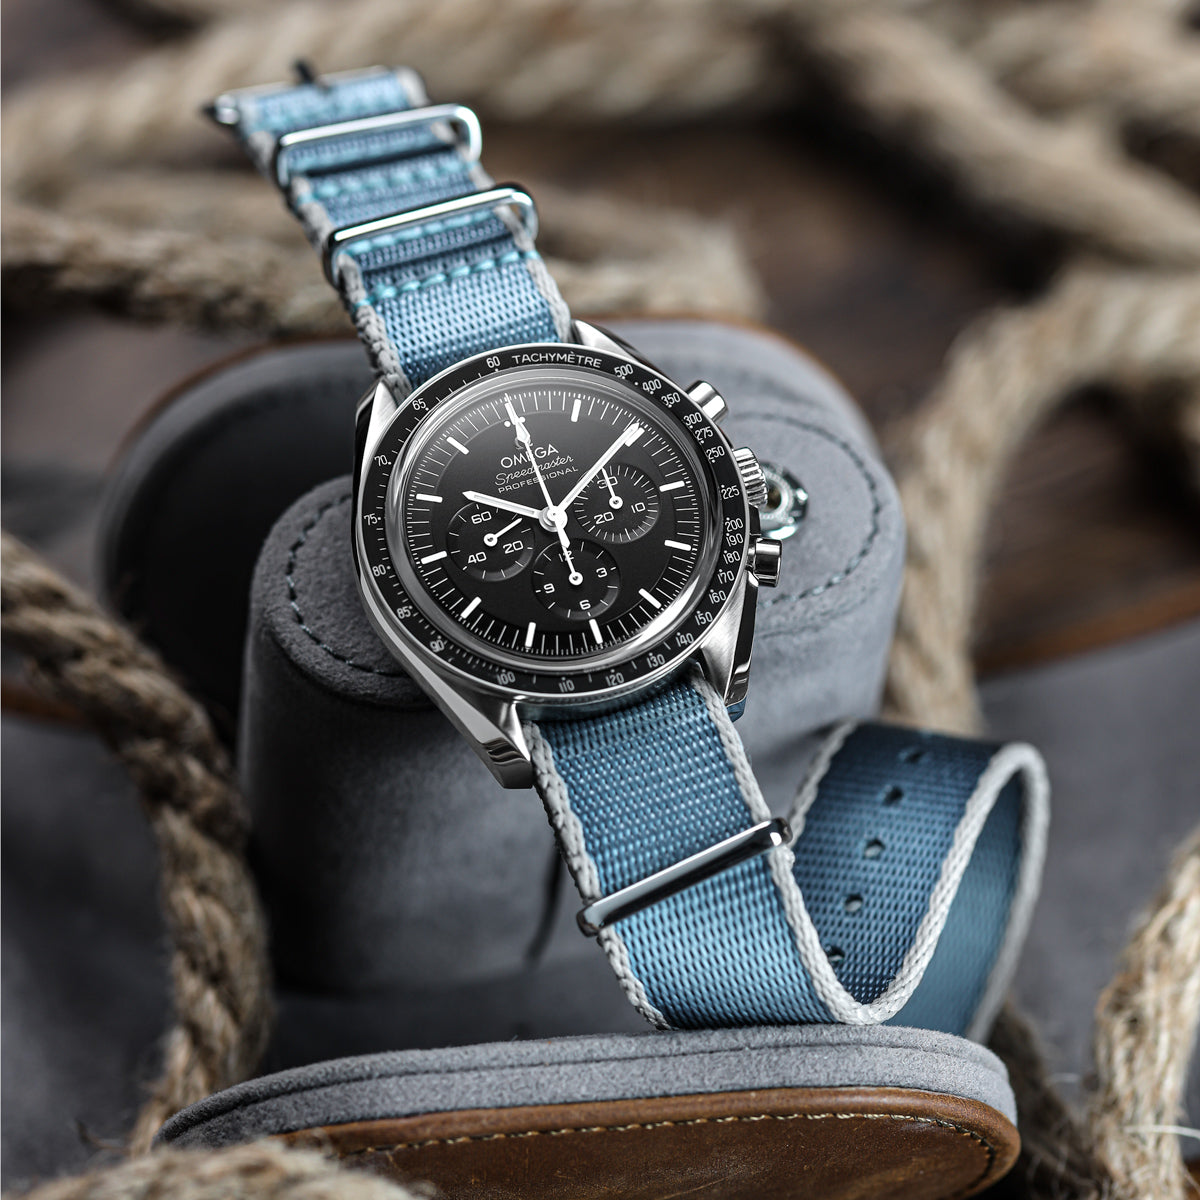 ZULUDIVER Iridescent Linen Weave Military Nylon Watch Strap - Navy Blue - additional image 1